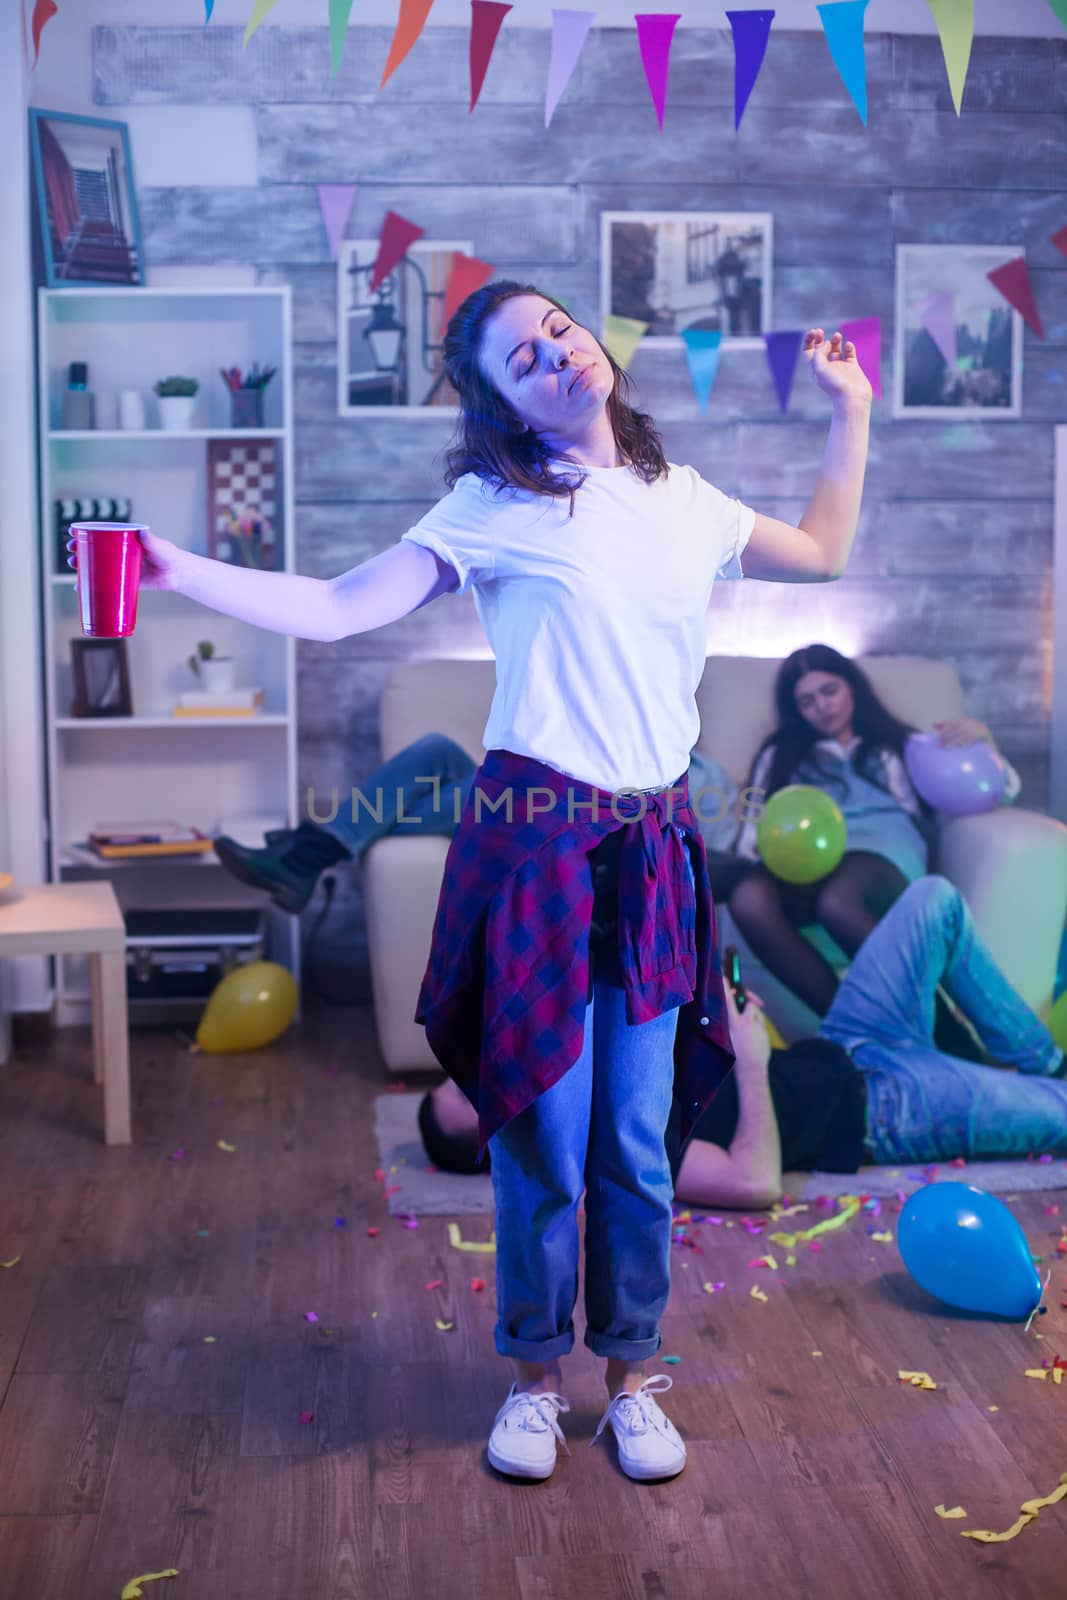 Joyful young woman dancing with a beer cup at a party.